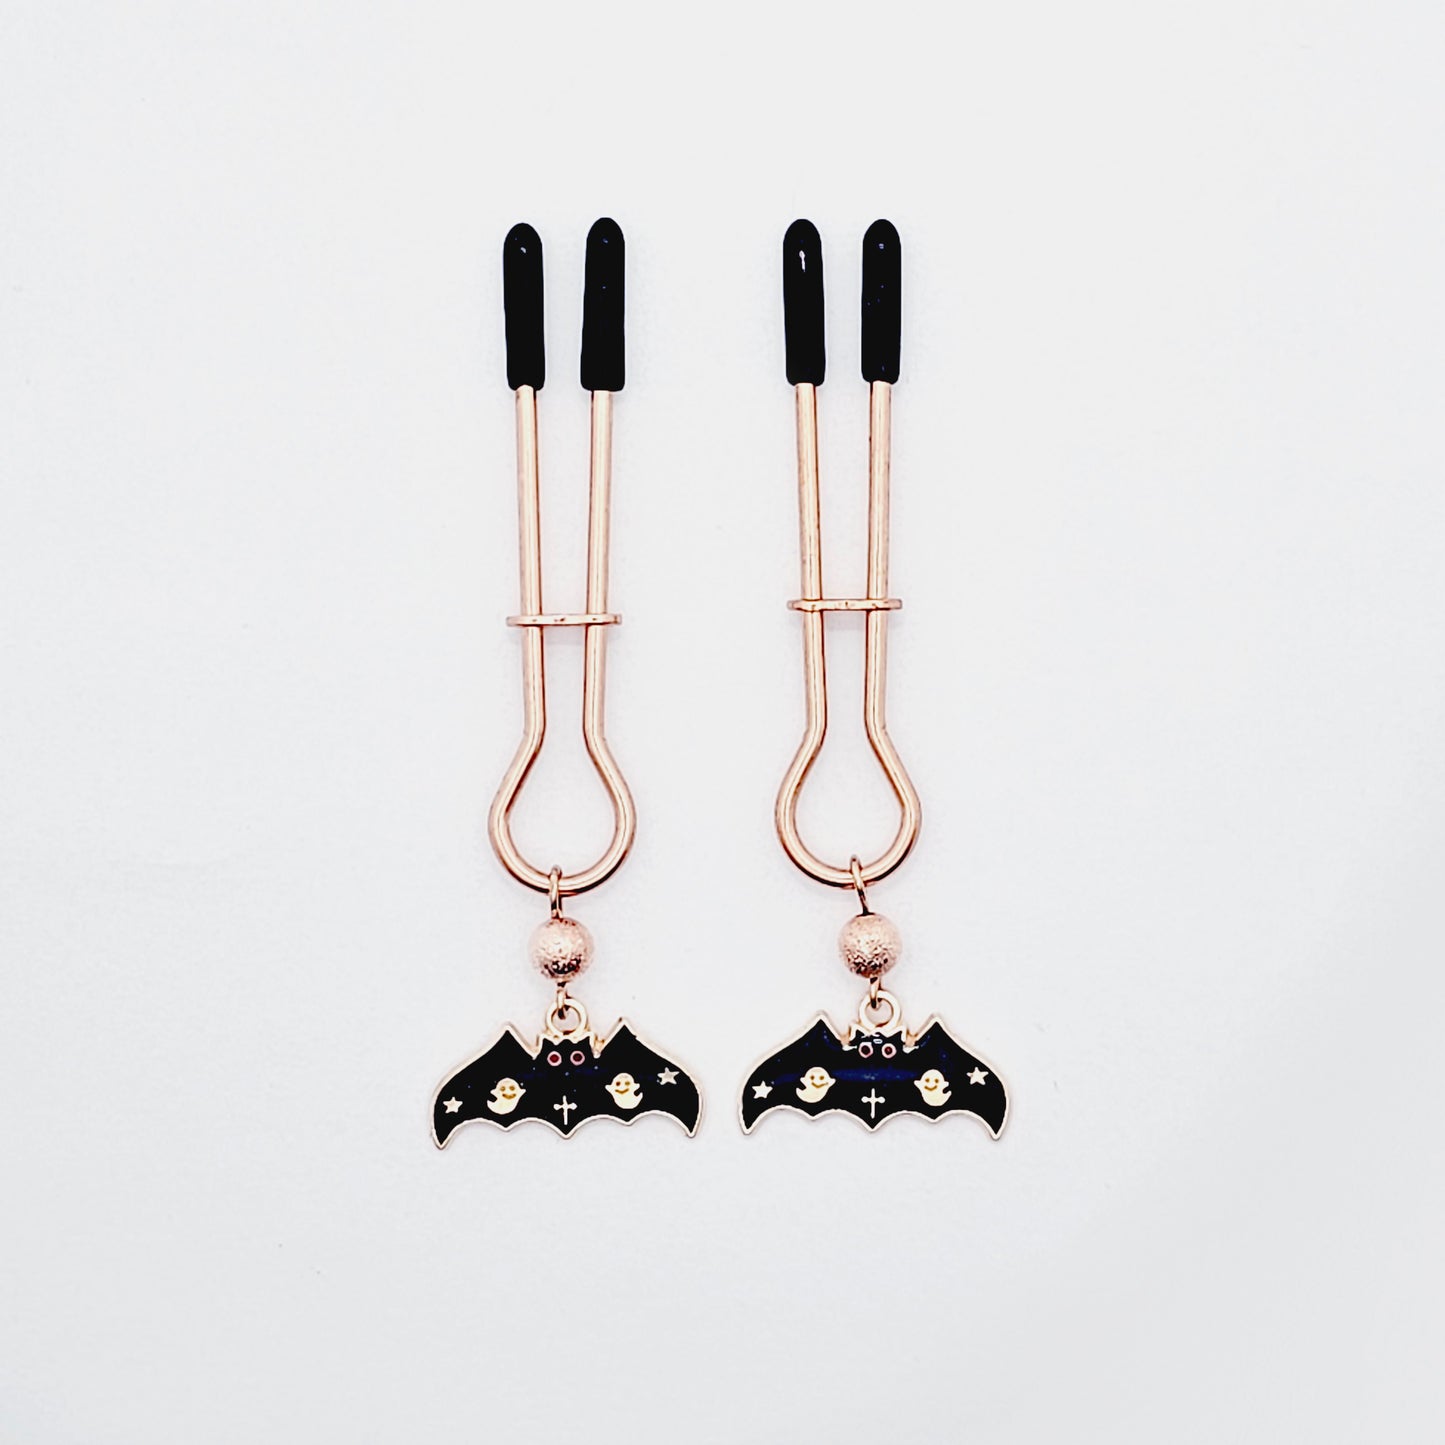 Spooky Nipple Clamps for Halloween. Rose Gold Straight Tweezer Clamps with Bats.